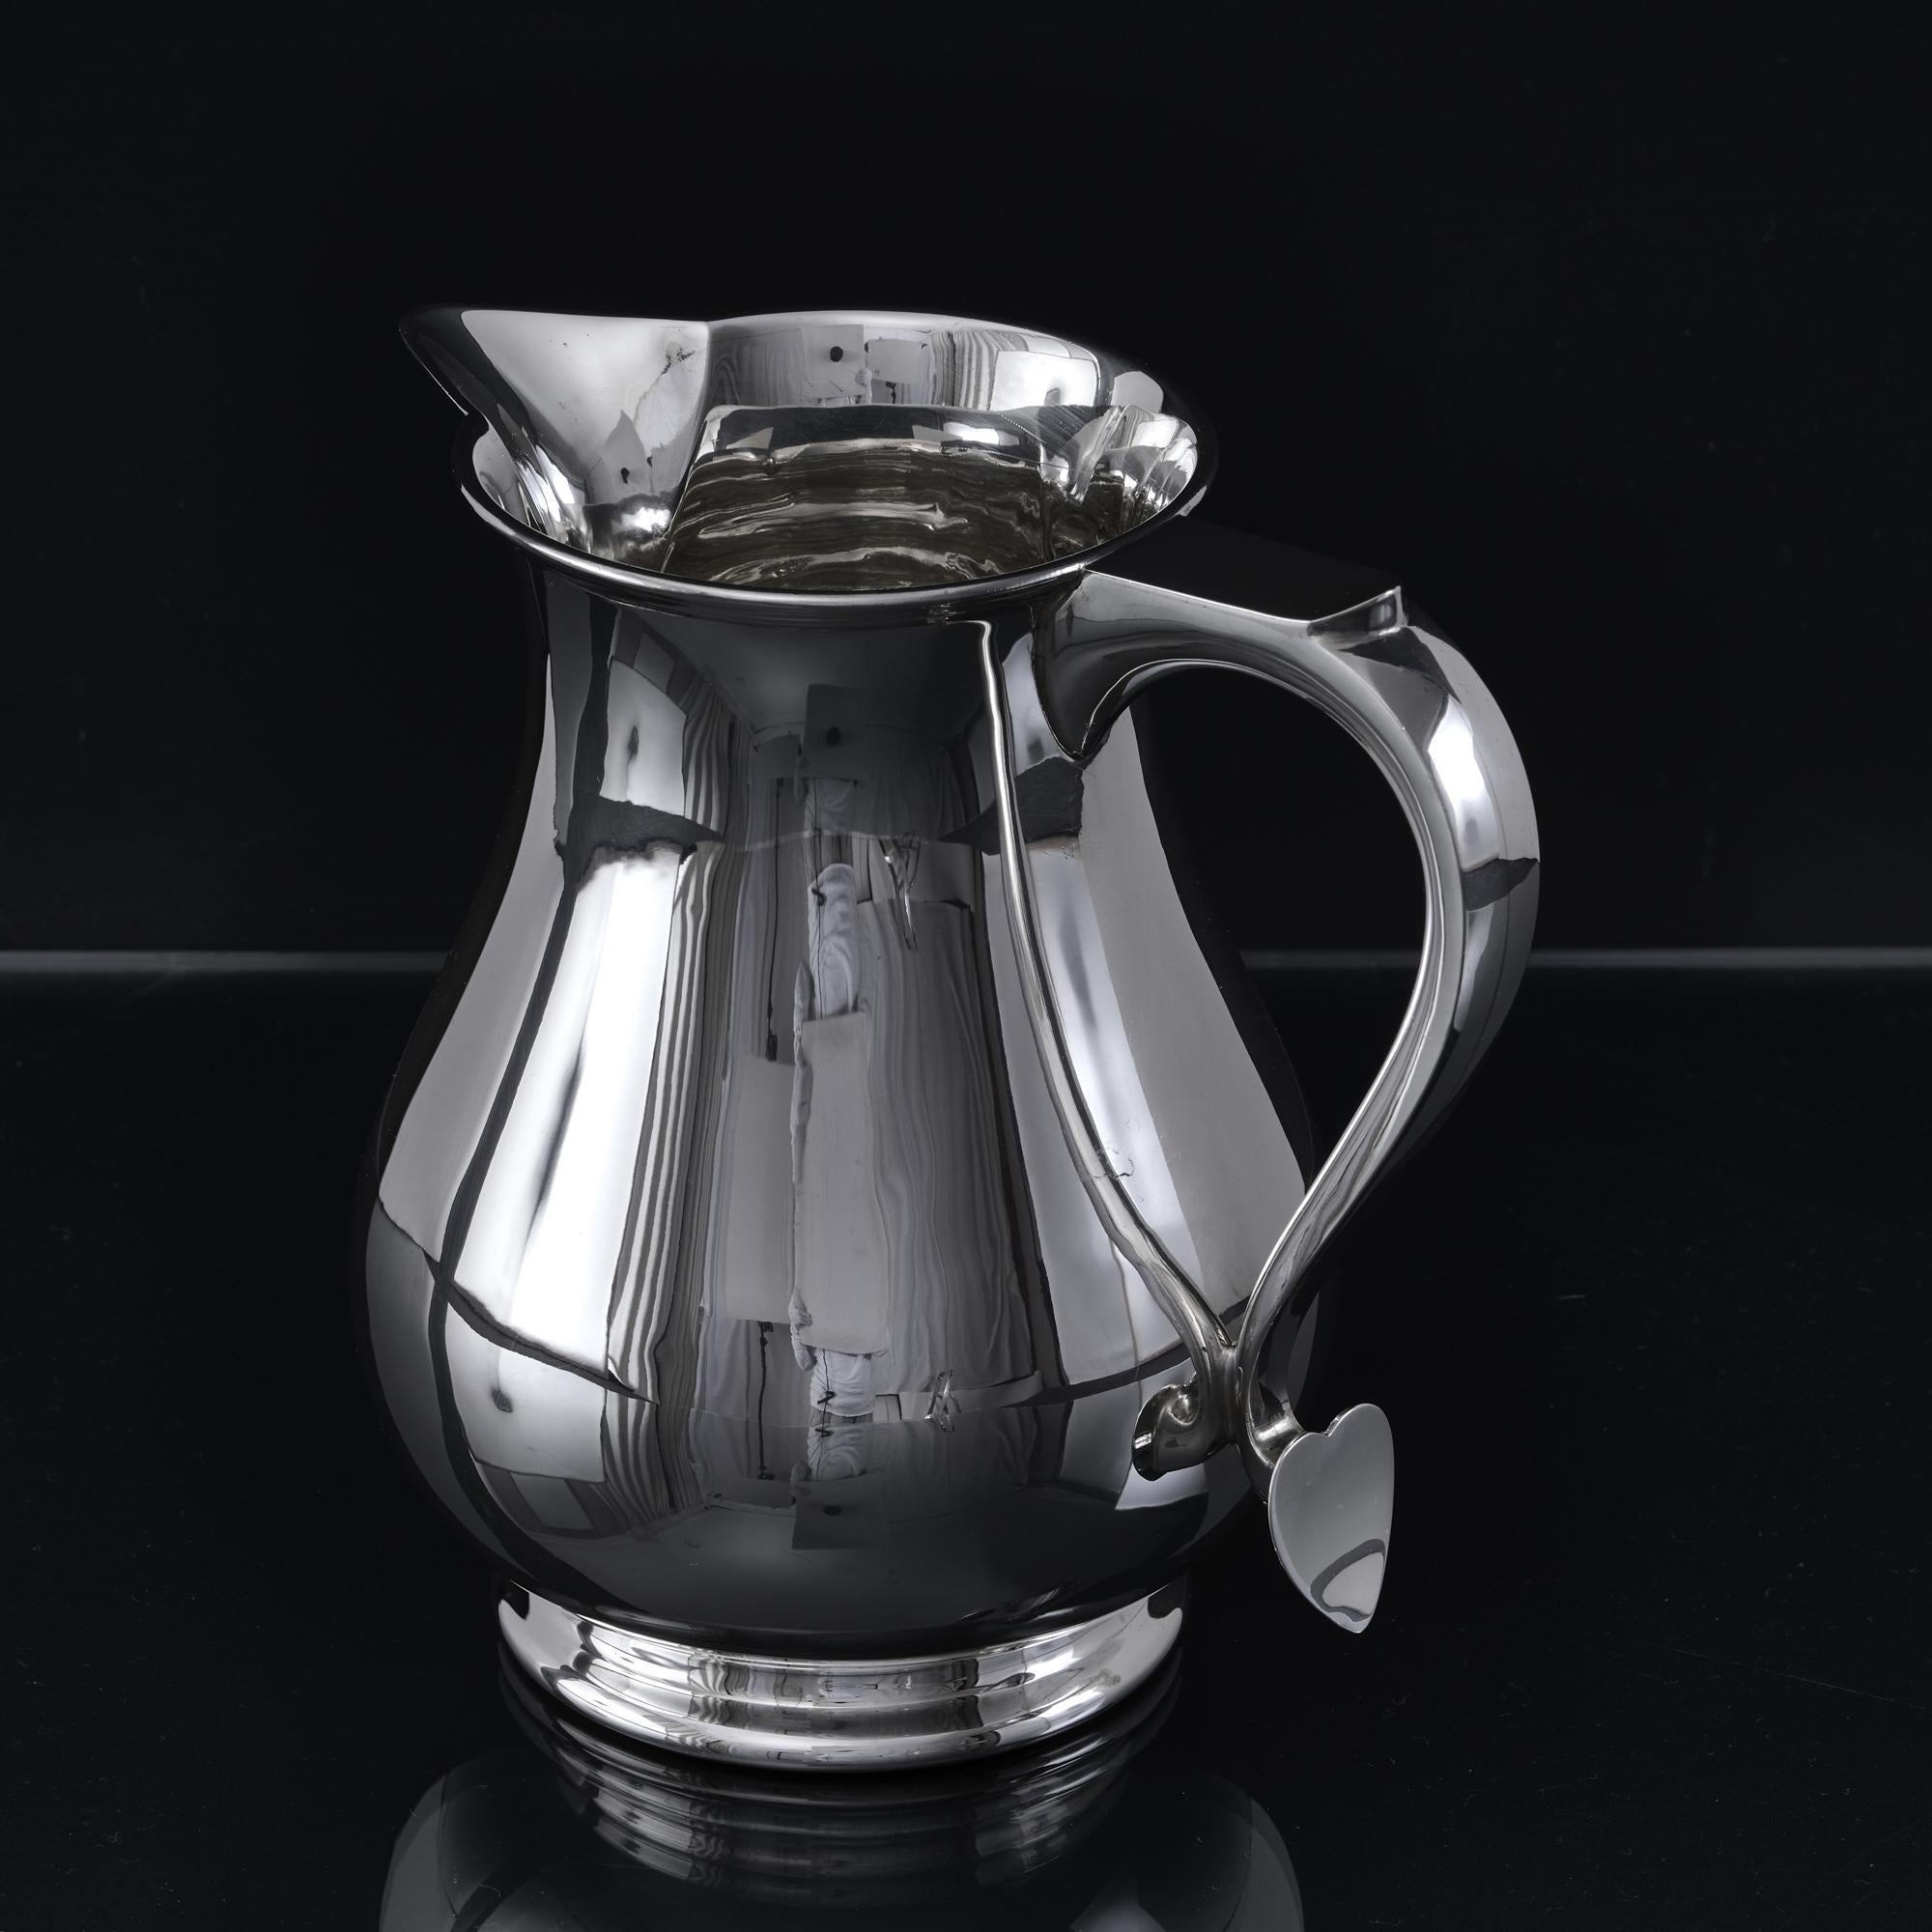 20th century sterling silver water jug in a classic 18th century style. This pleasing bellied form was first made popular in the early 1700s and was originally made to hold and serve beer, given that beer was much safer to drink than water at that